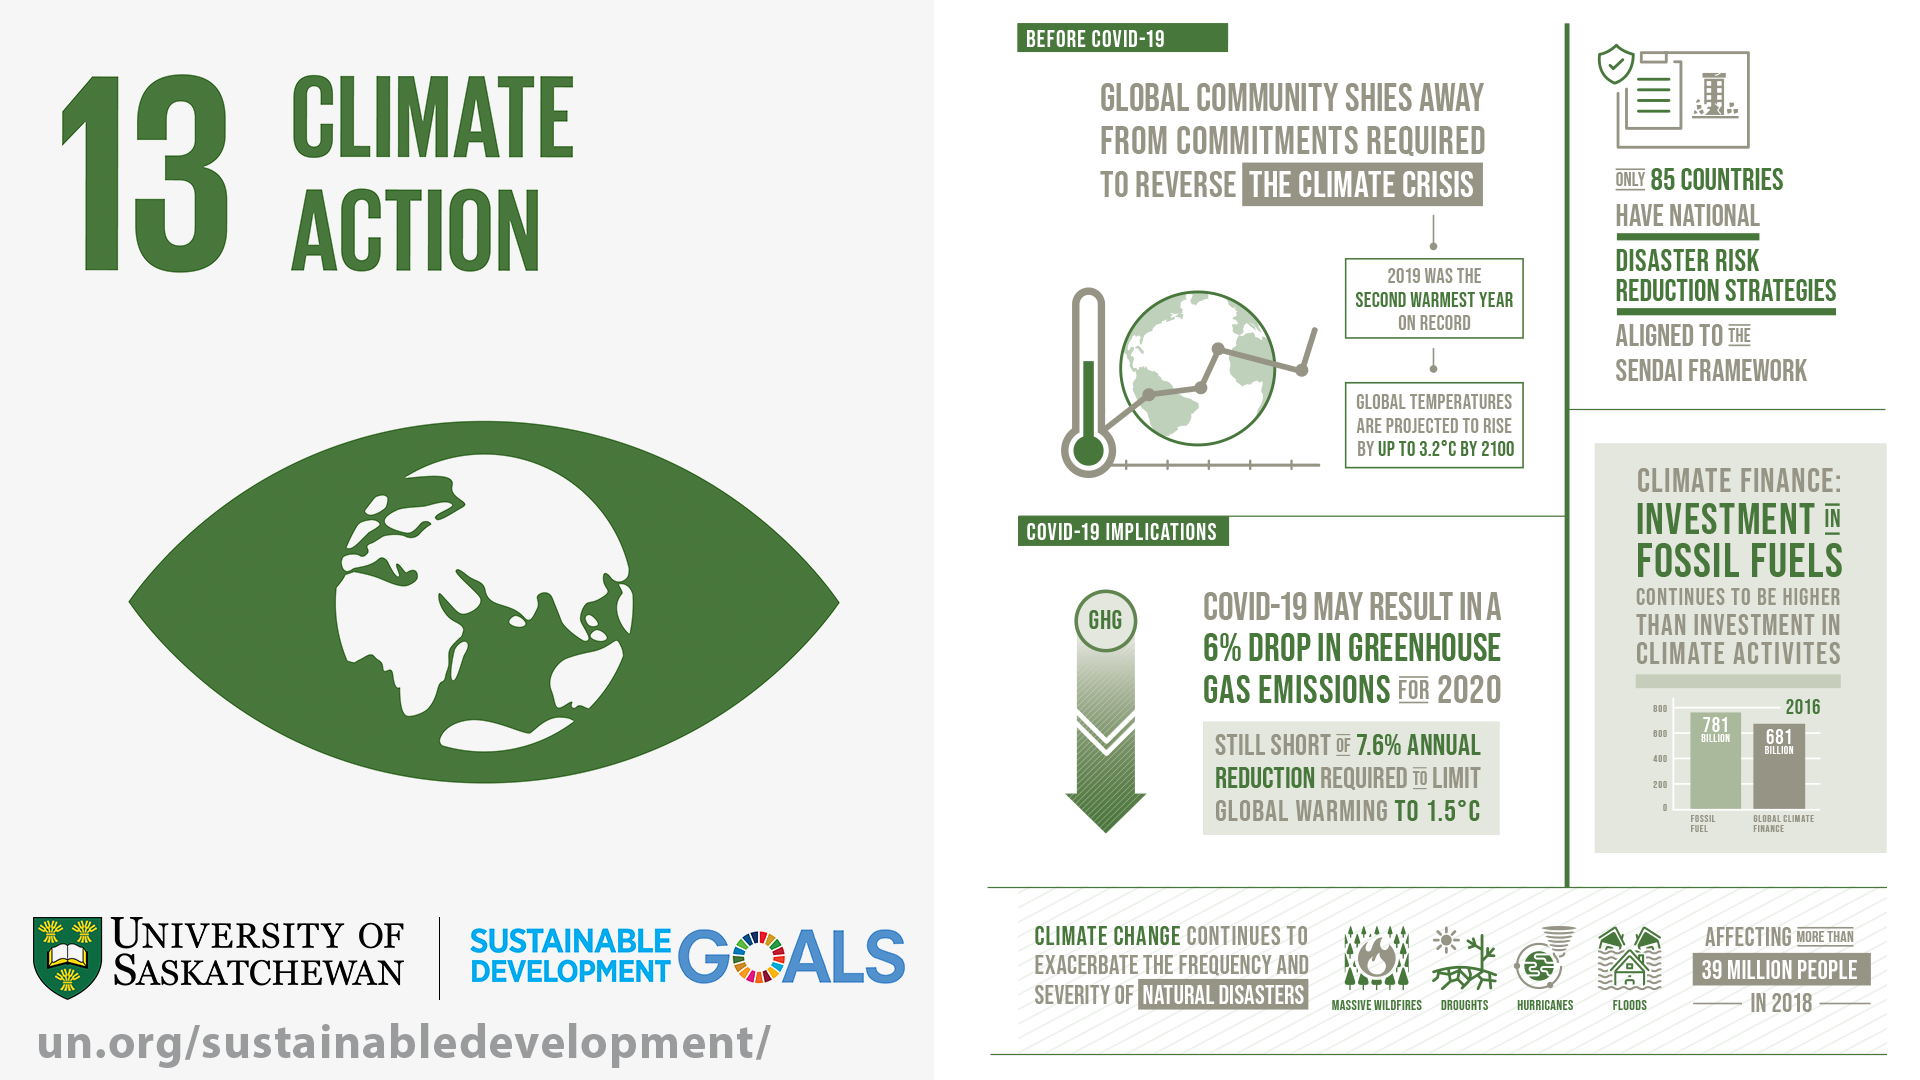 sdg-goal-13-infographic-2020.png